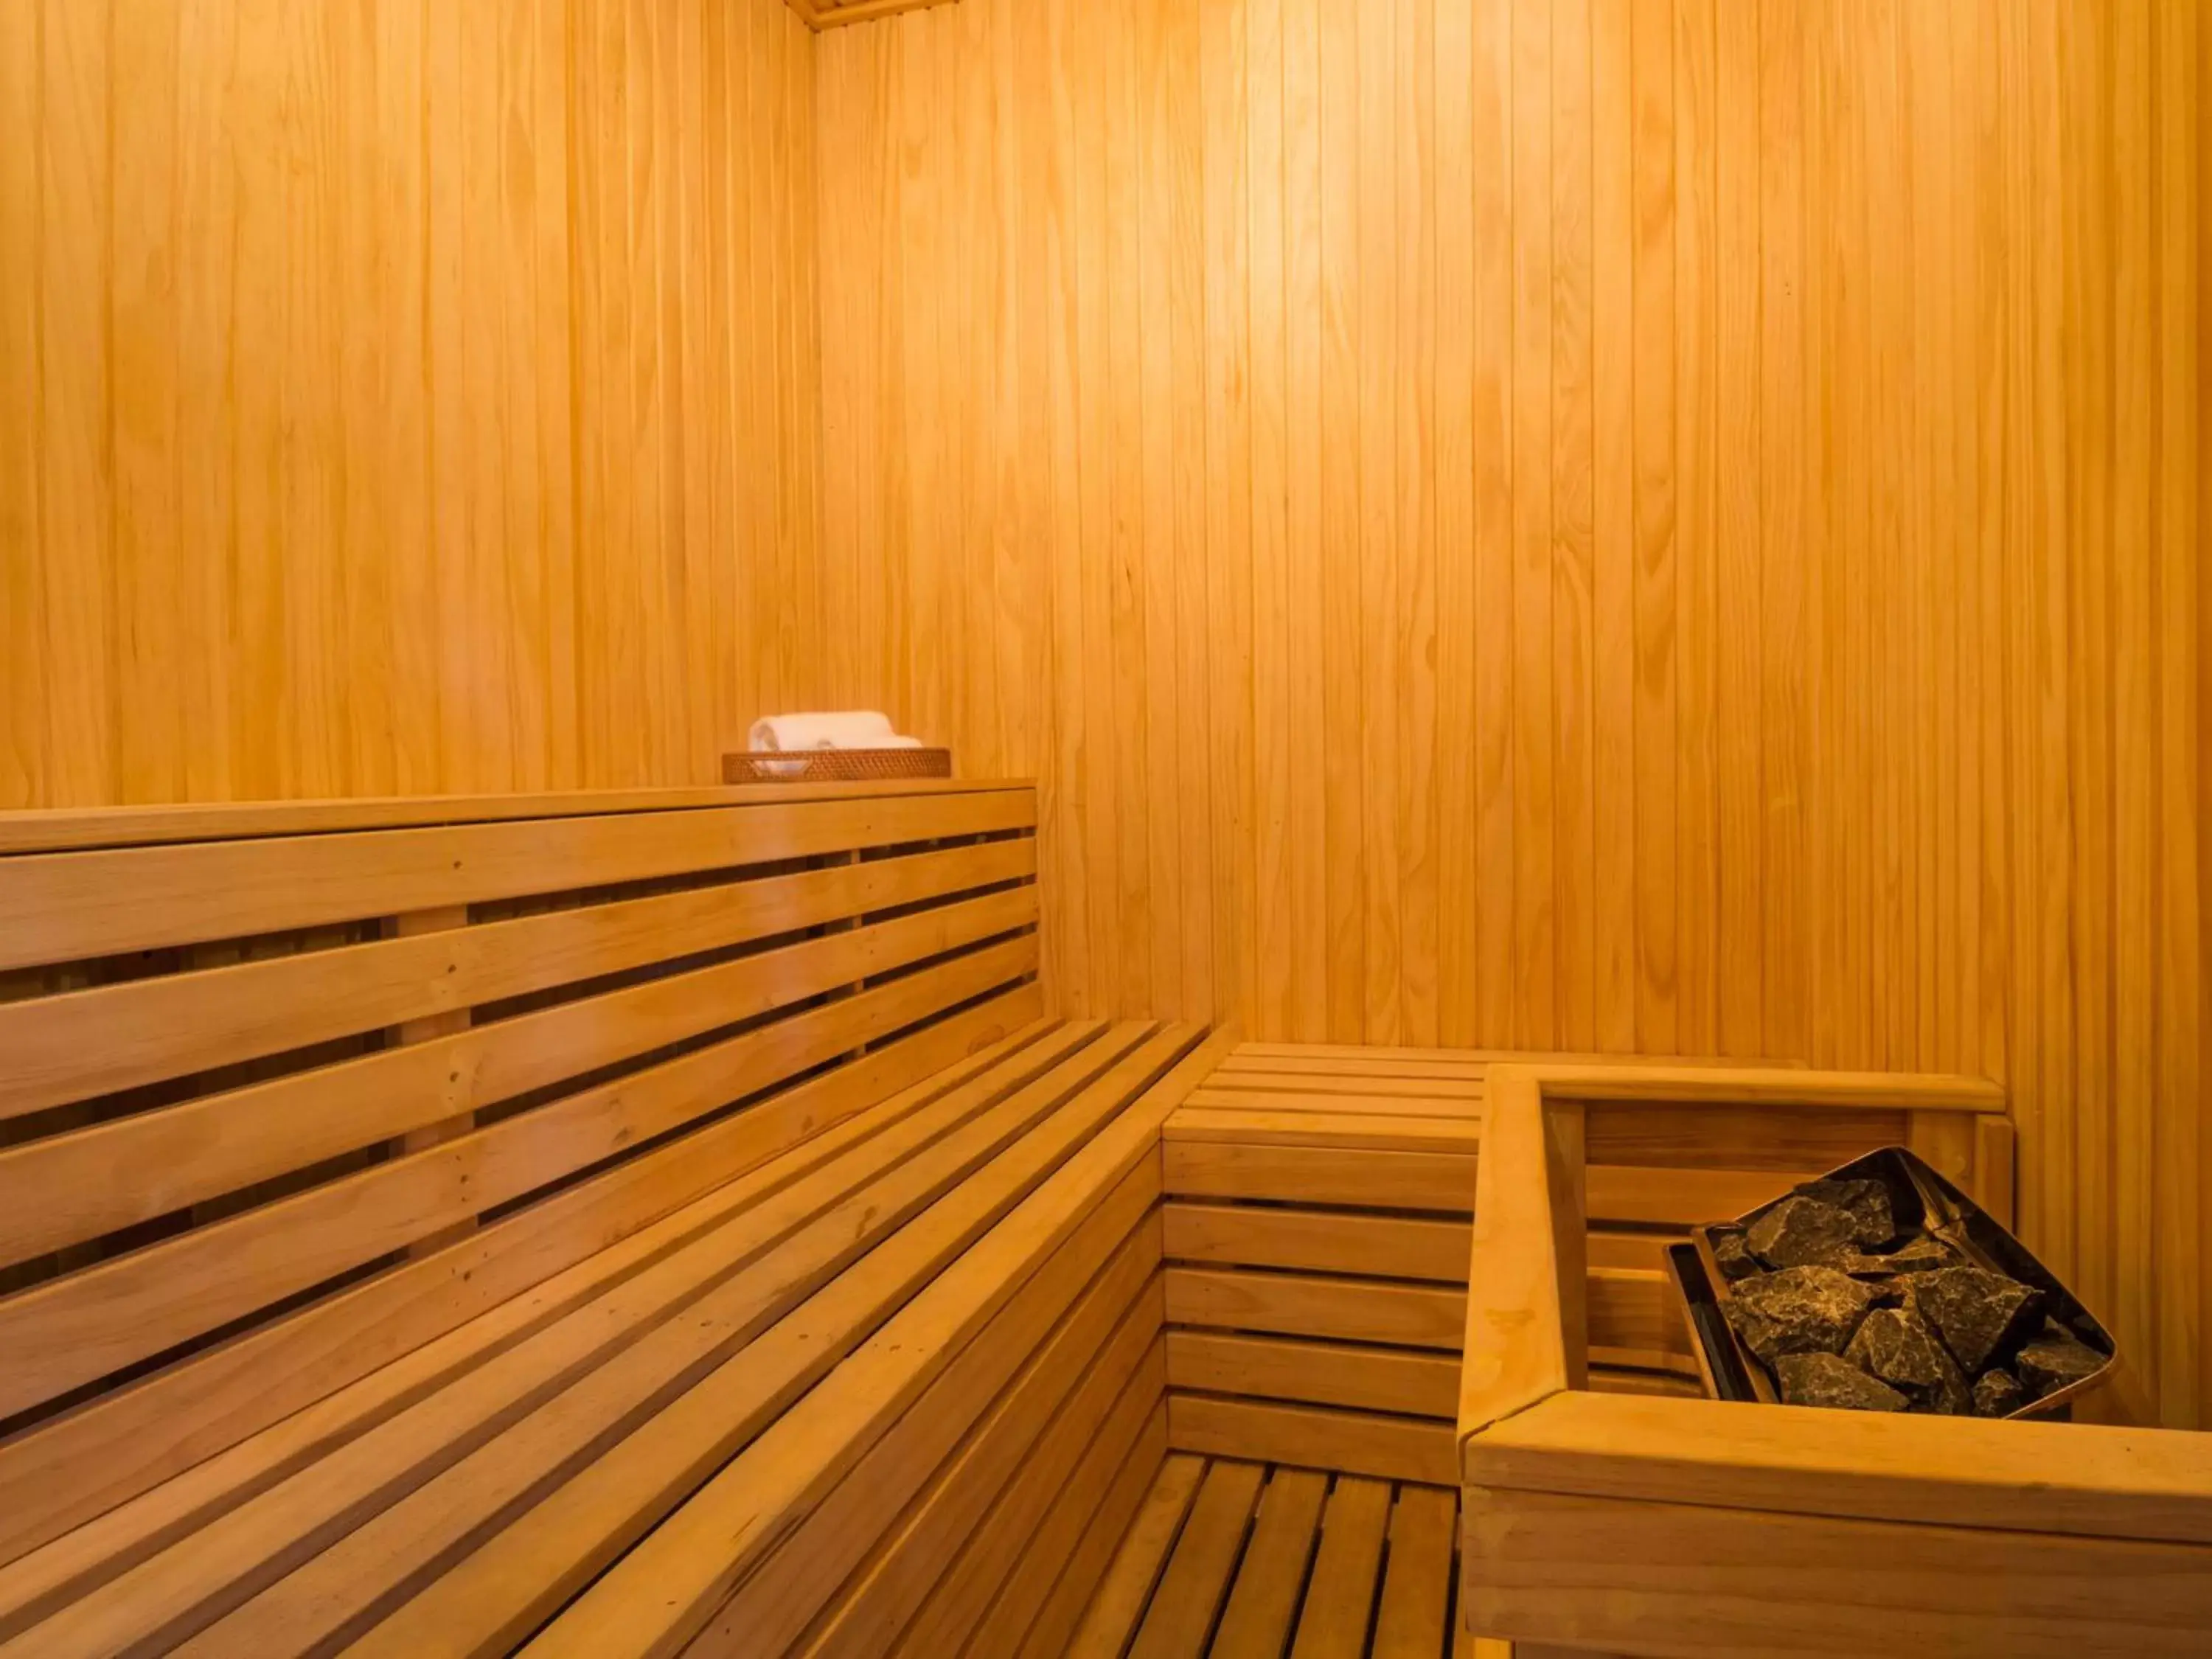 Sauna in Copthorne King's Hotel Singapore on Havelock